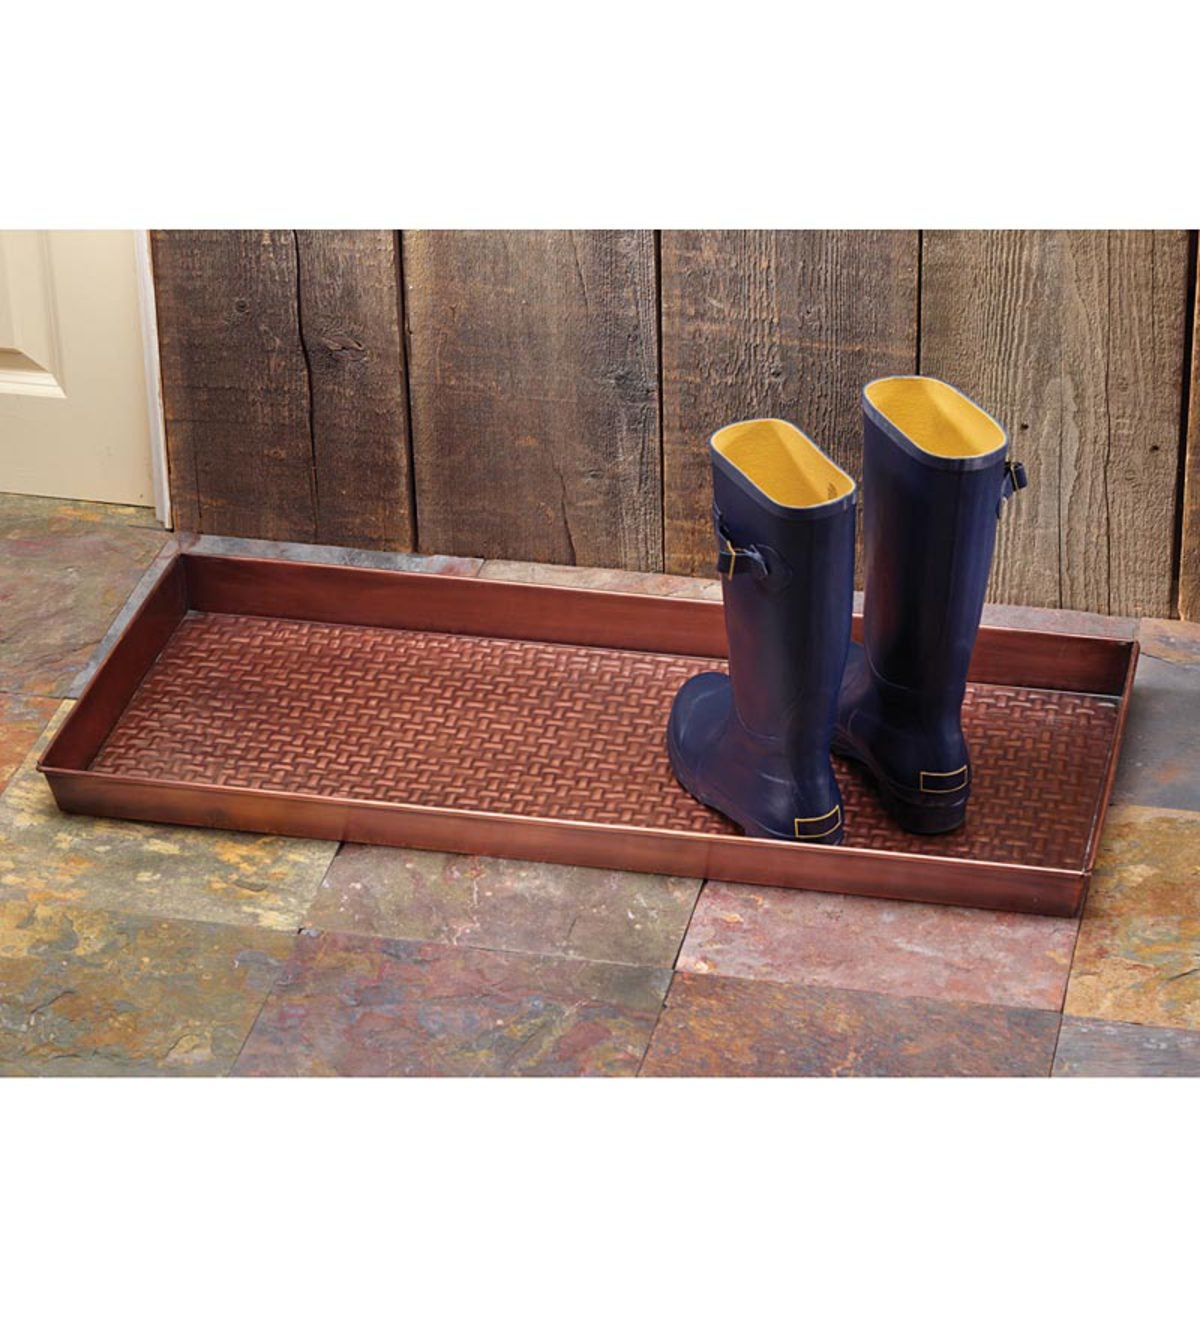 Copper-Finished Galvanized Steel Basketweave Boot Tray